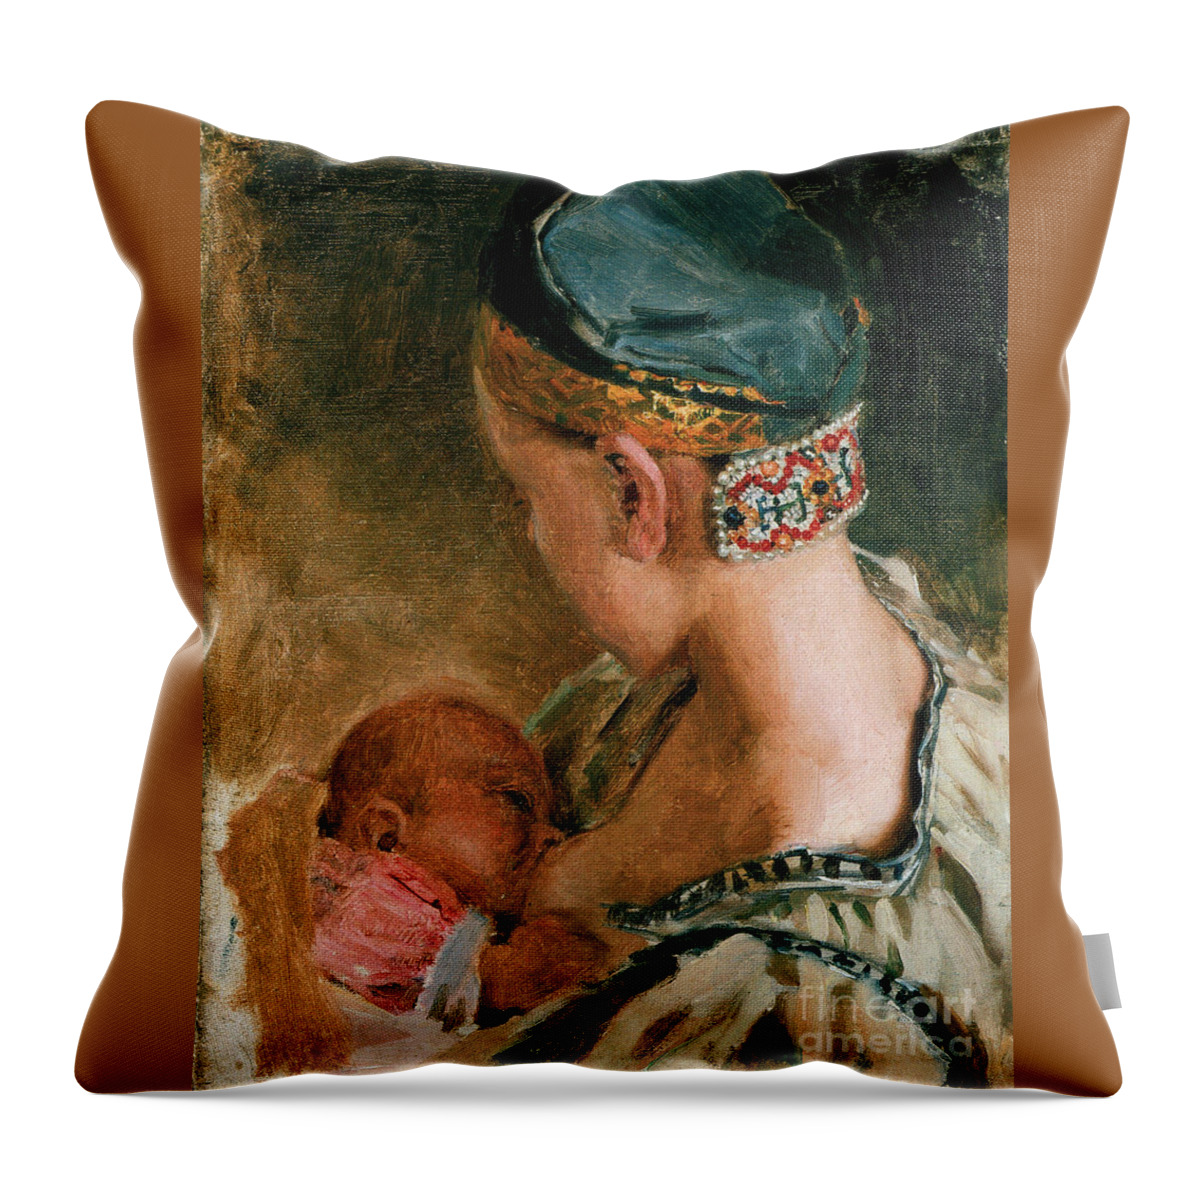 Akseli Gallen-kallela Throw Pillow featuring the painting Karelian Mother by Celestial Images